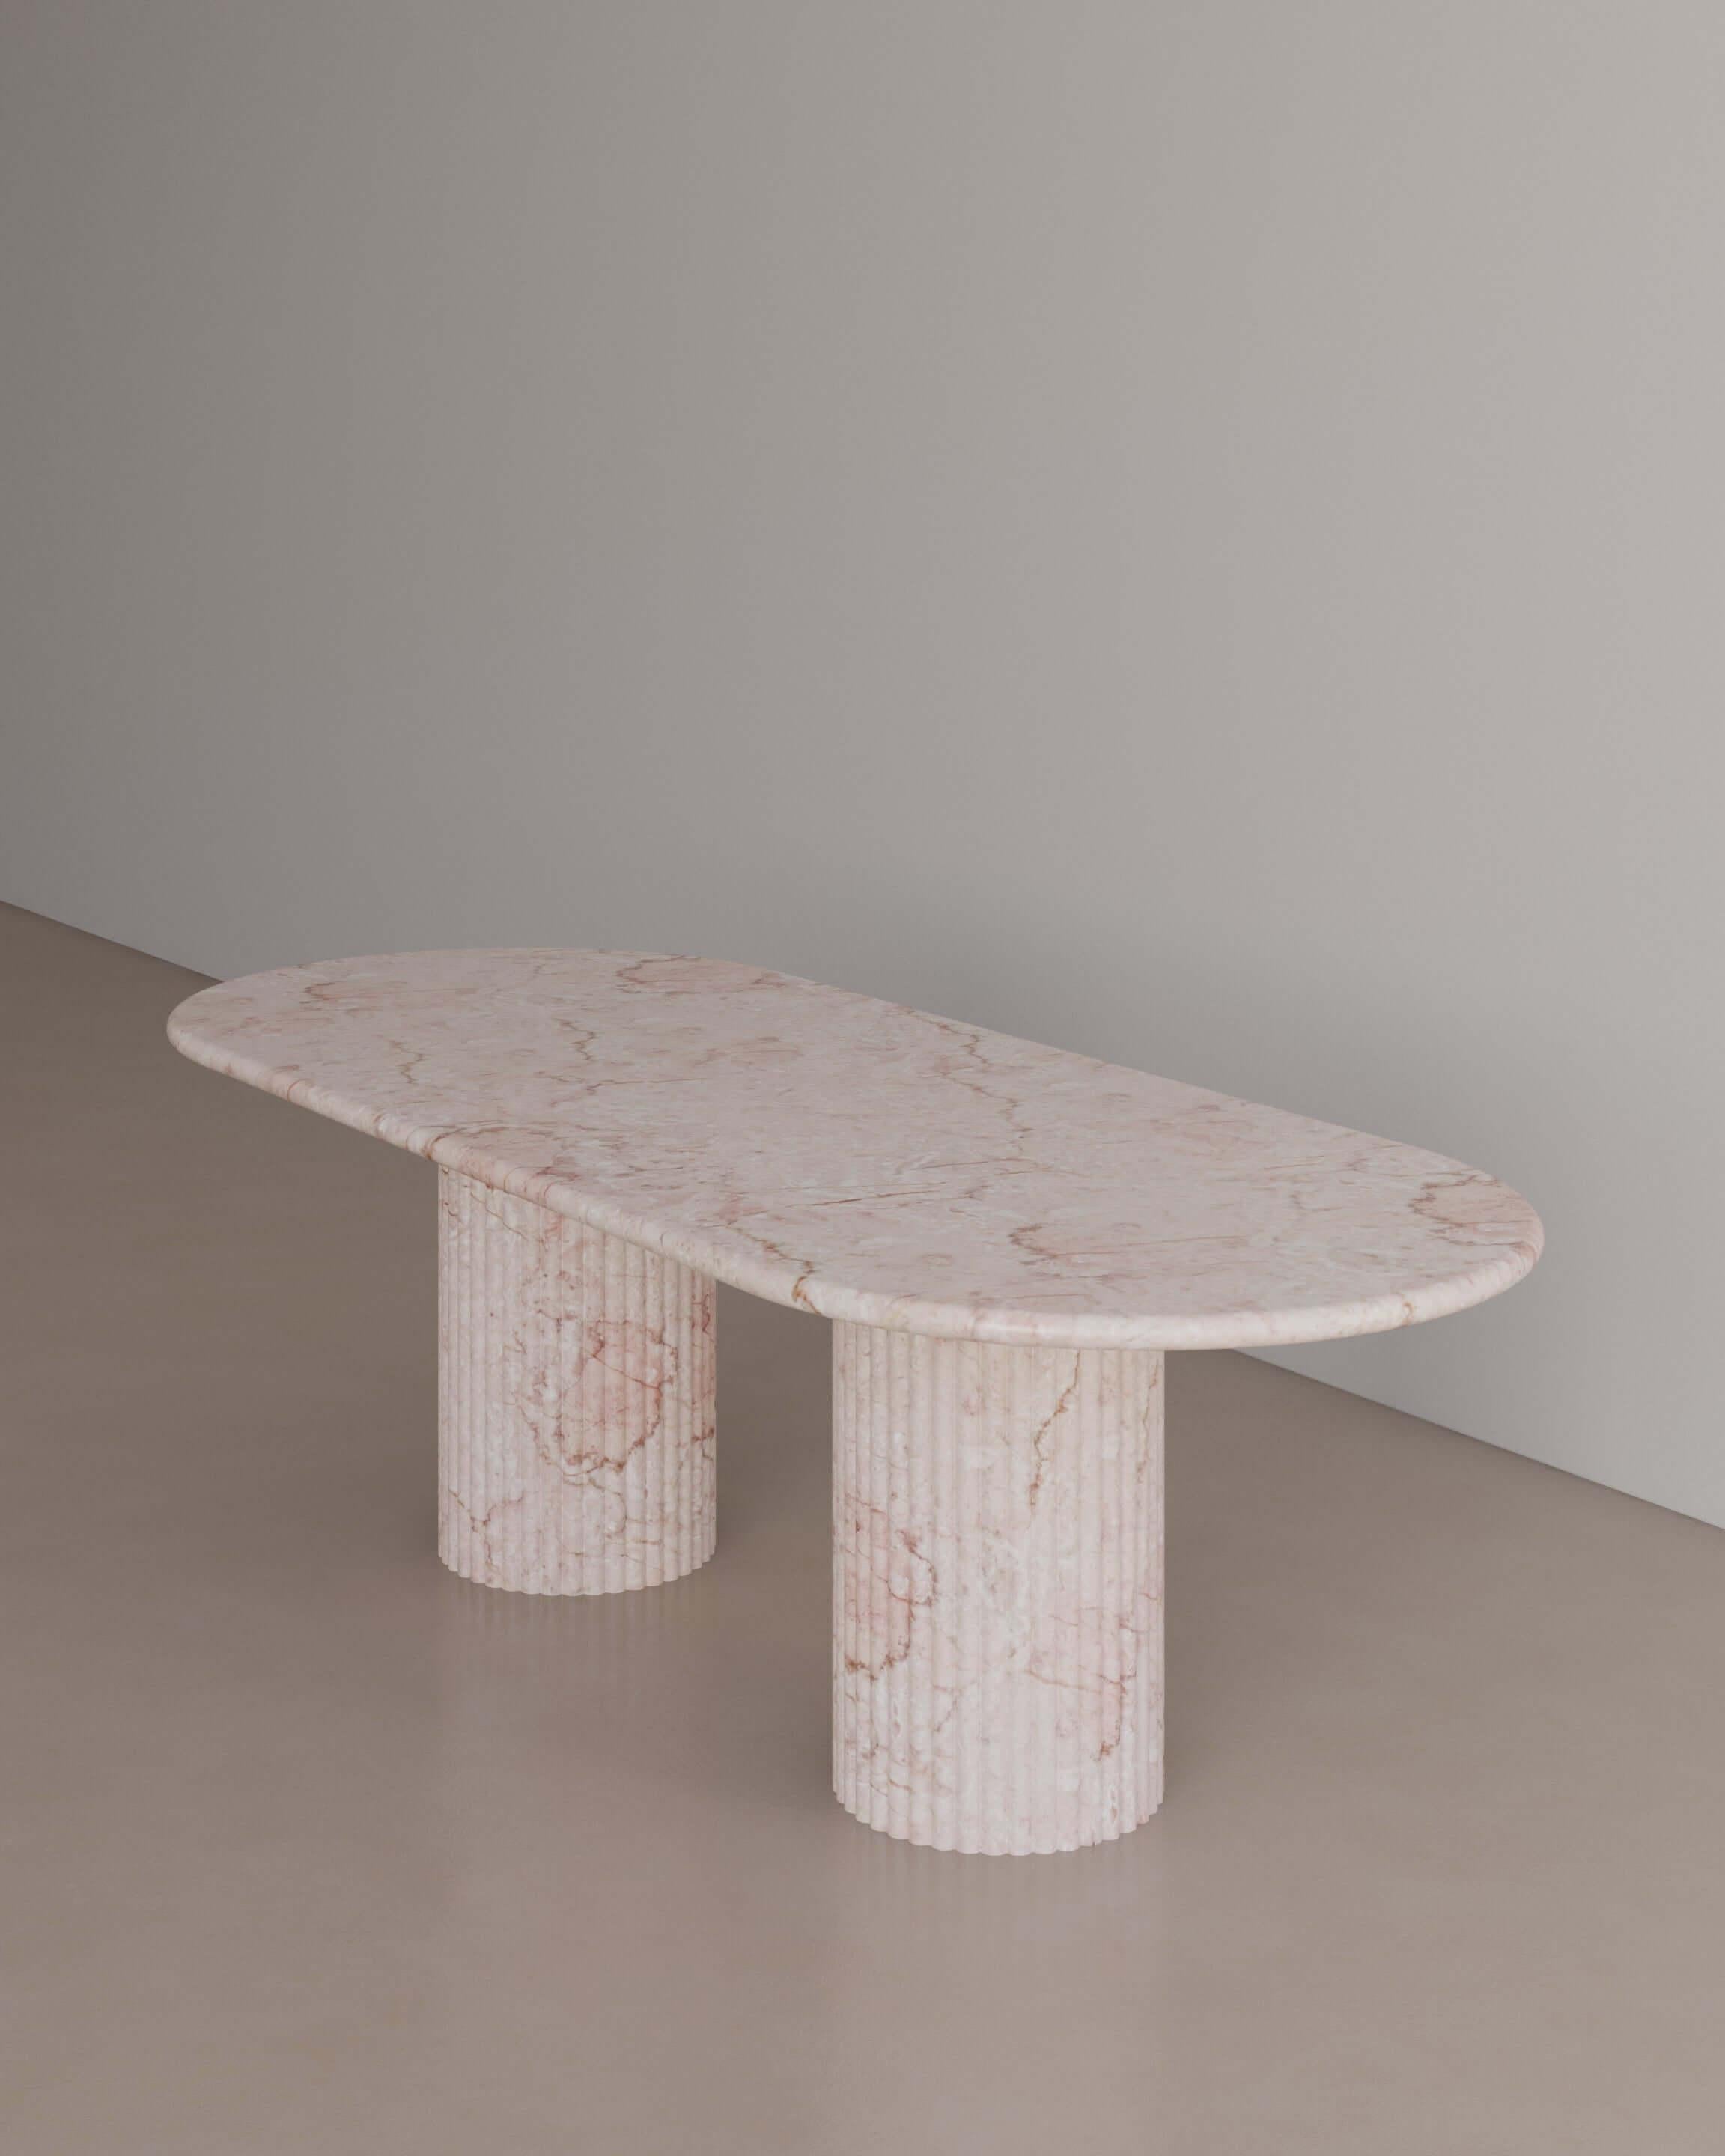 The Essentialist brings you The Antica Dining Table II in Afshar Pink Marble. An oval table top resolved by smooth bullnose edges rests on two supporting pillars. Architectural form is refined by artistic expression echoing Roman culture. This